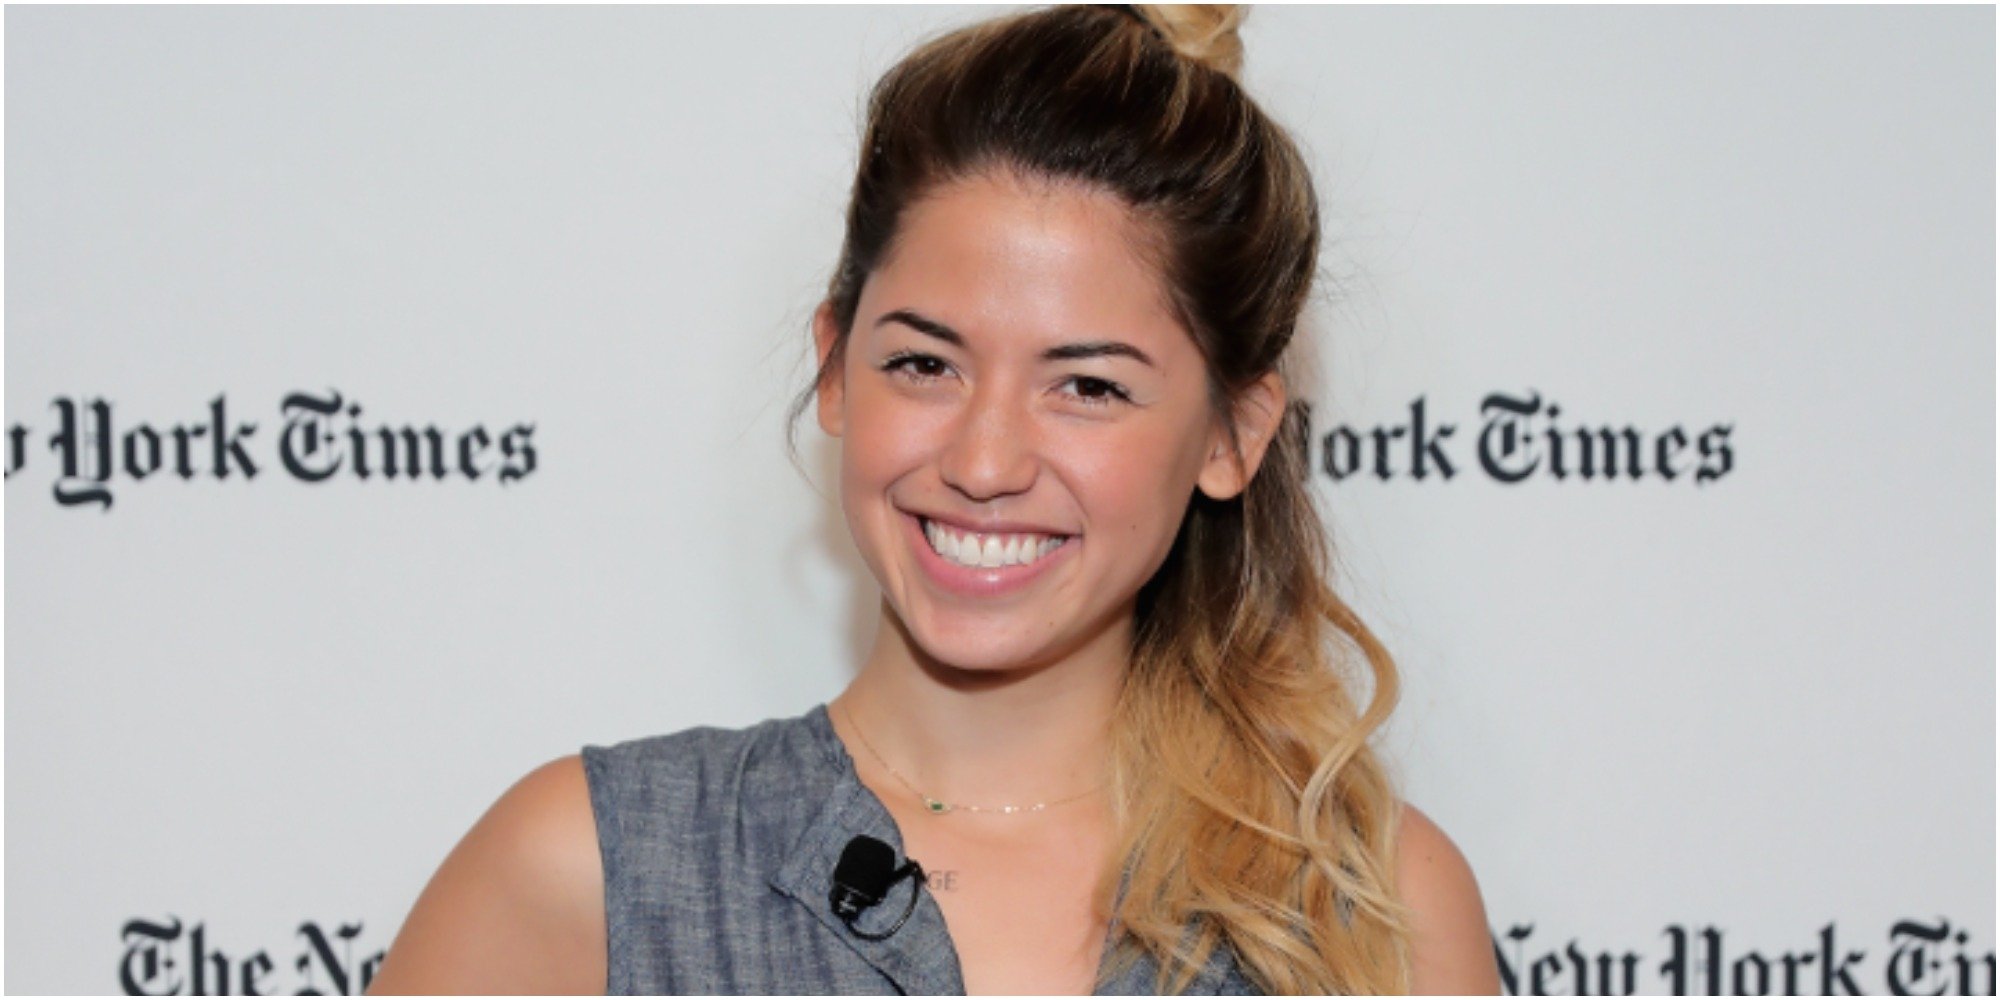 Molly Yeh is the star of "Girl Meets Farm" on the Food Network.